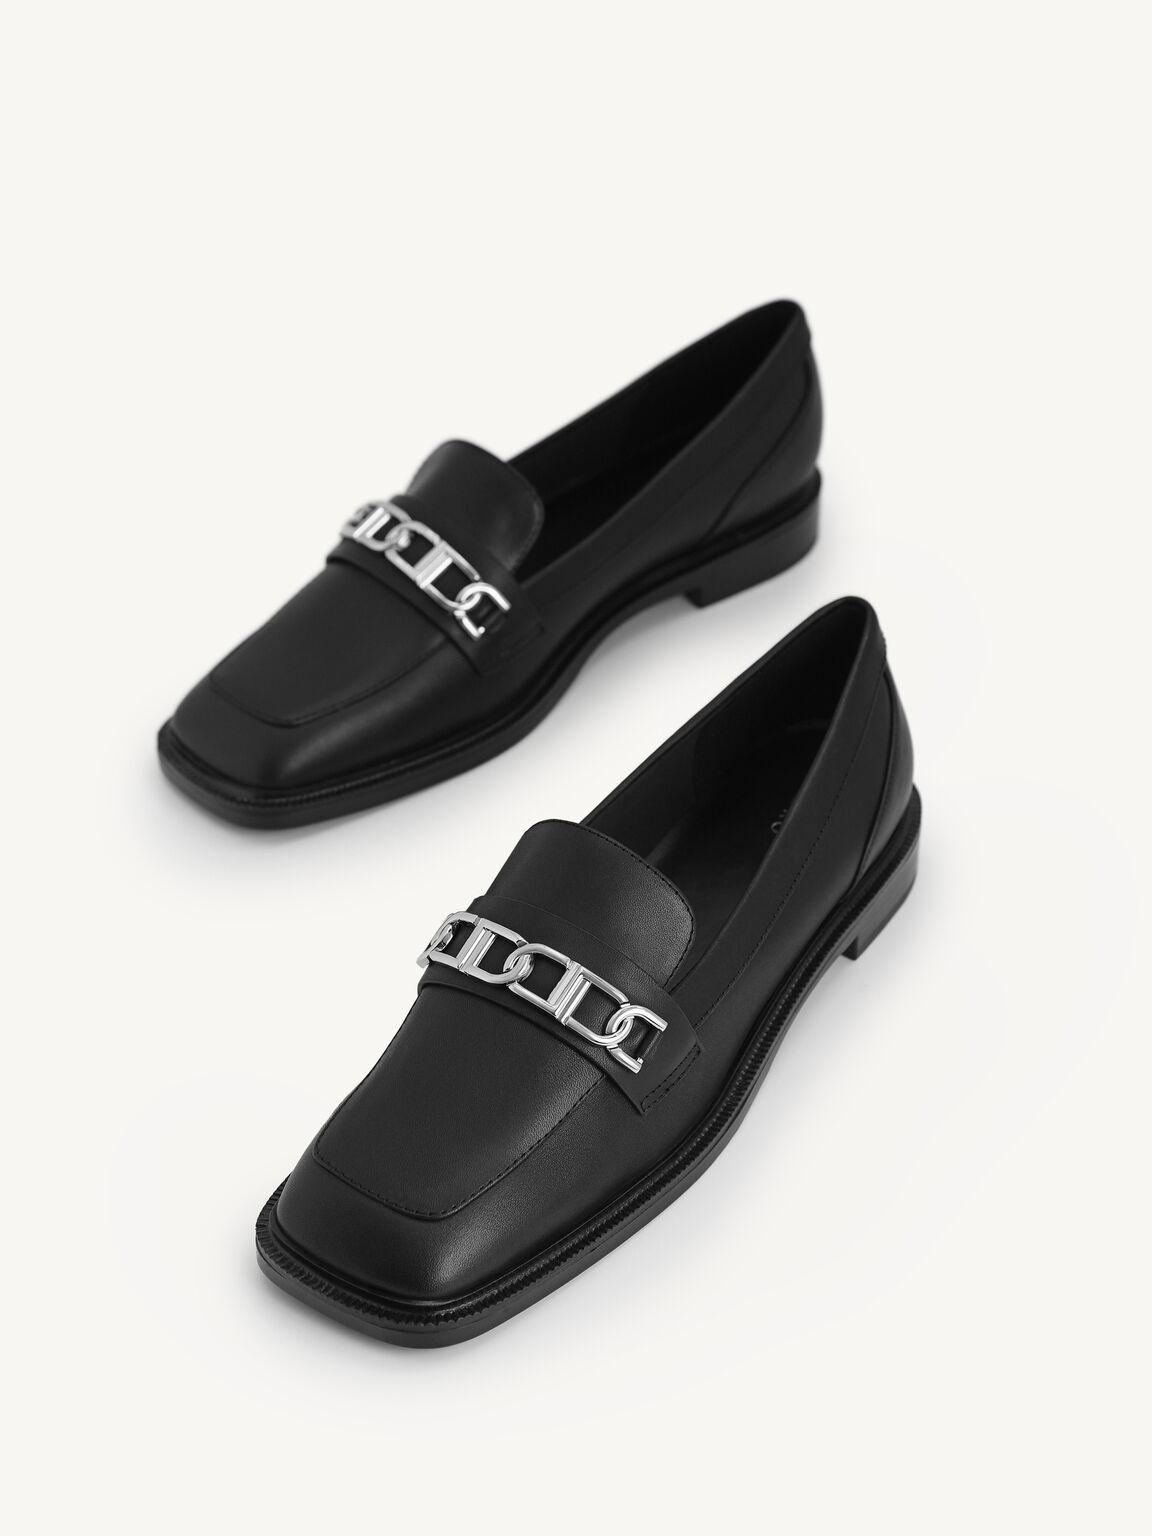 Icon Leather Square Toe Loafers, Black